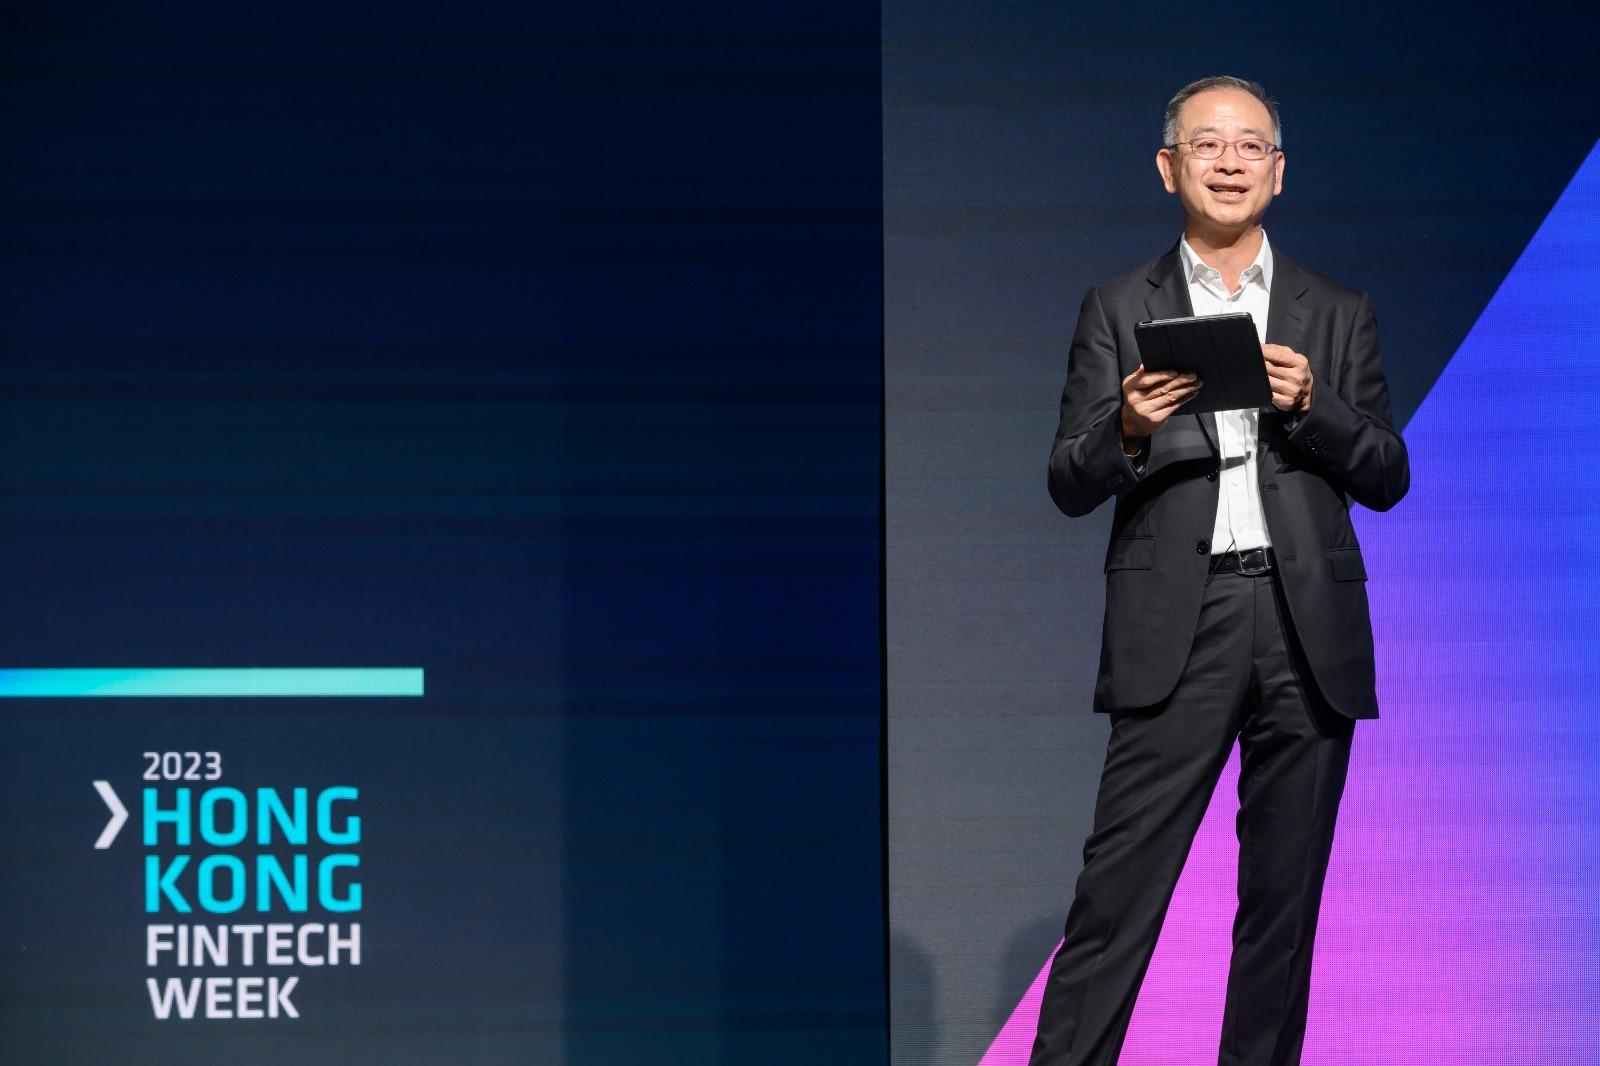 The Hong Kong Monetary Authority (HKMA) today (November 2) co-organised Hong Kong FinTech Week 2023 with the InvestHK. Photo shows the Chief Executive of the HKMA, Mr Eddie Yue, delivering the opening keynote at the Hong Kong FinTech Week 2023.